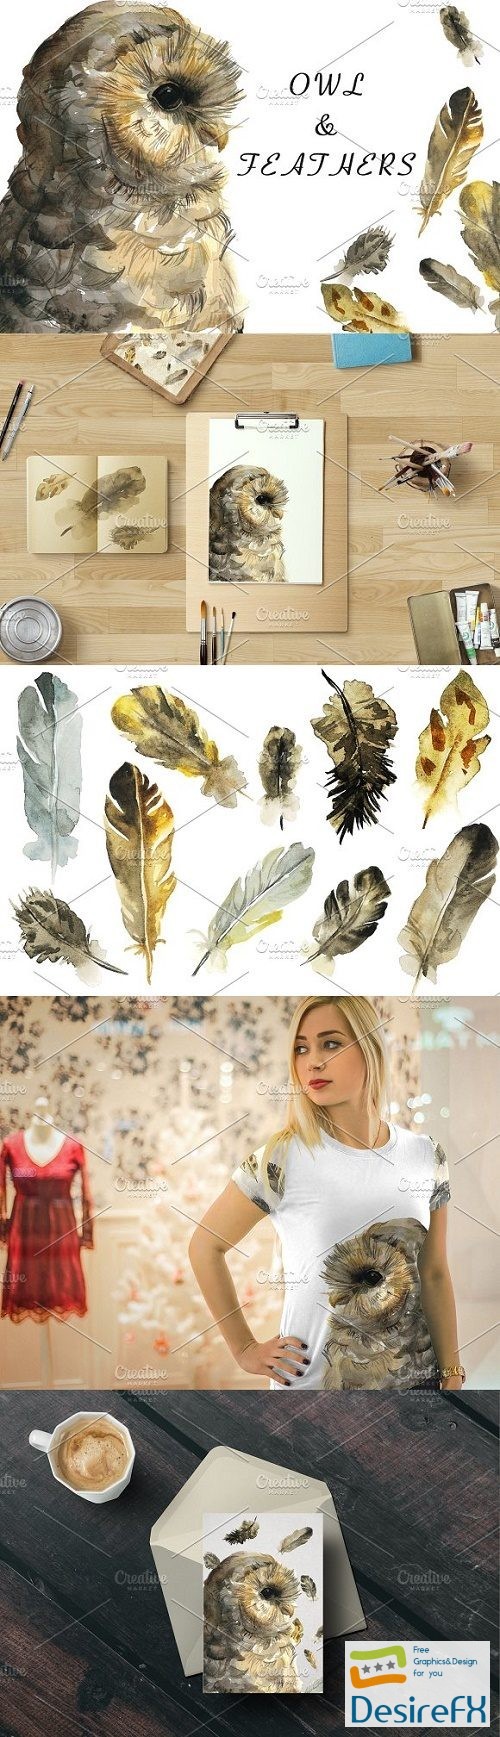 Owl and feathers watercolor set - 1581217